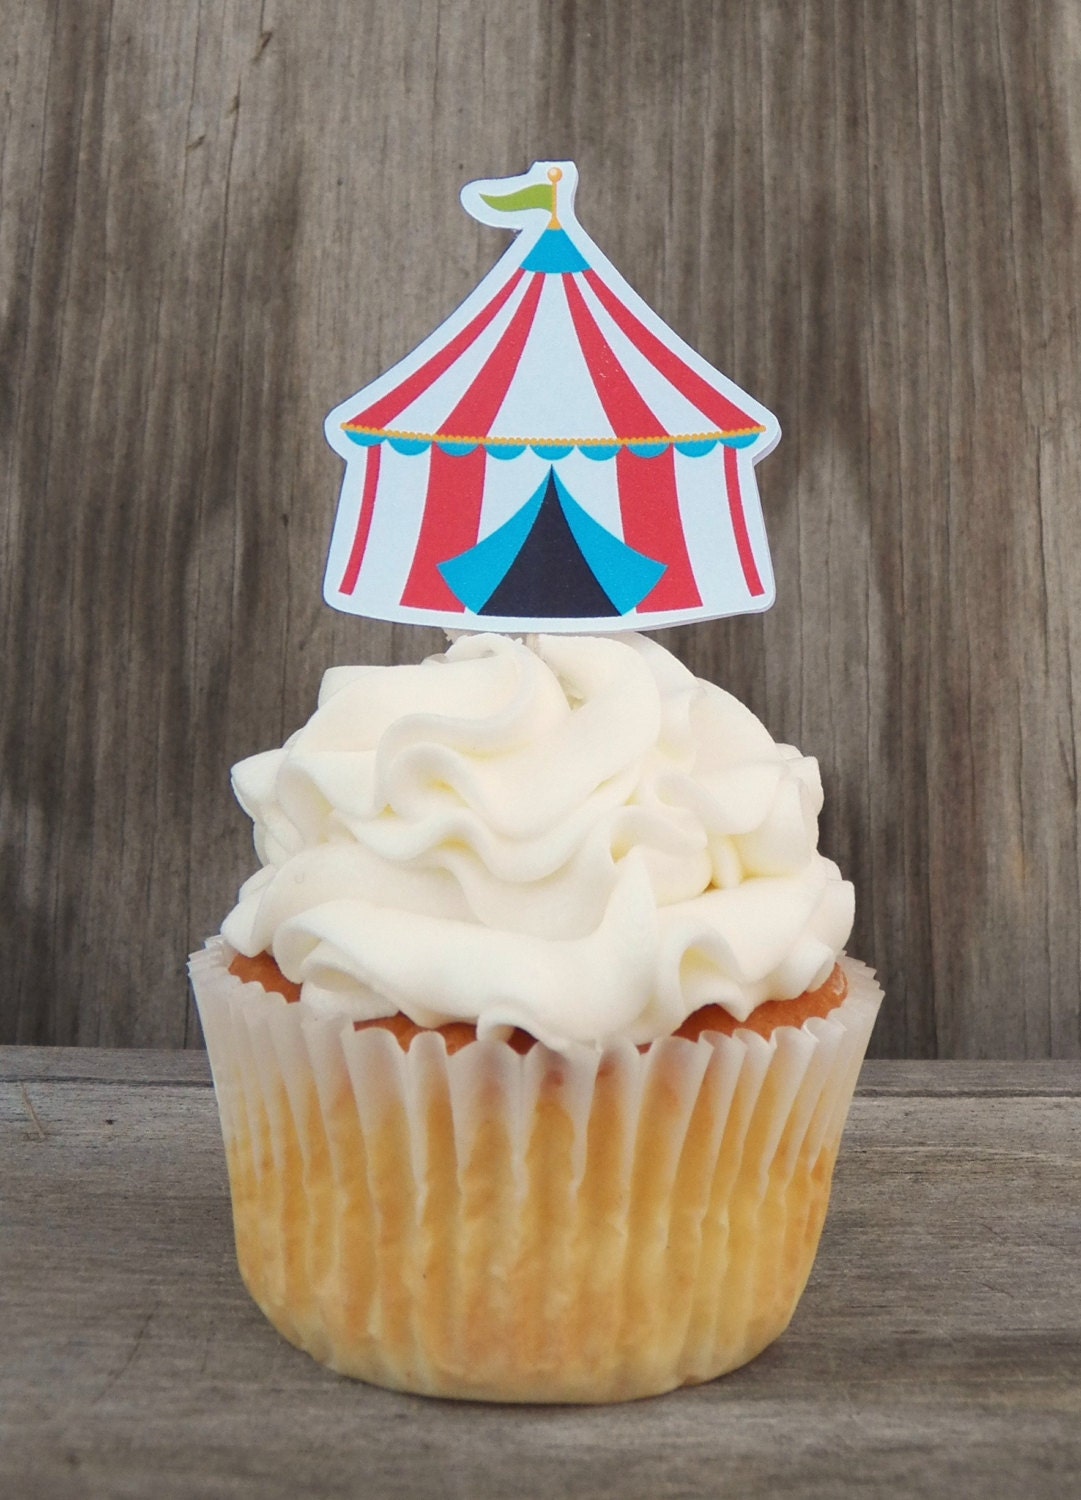 Circus Party - Set of 24 Circus Tent Cupcake Toppers by The Birthday House